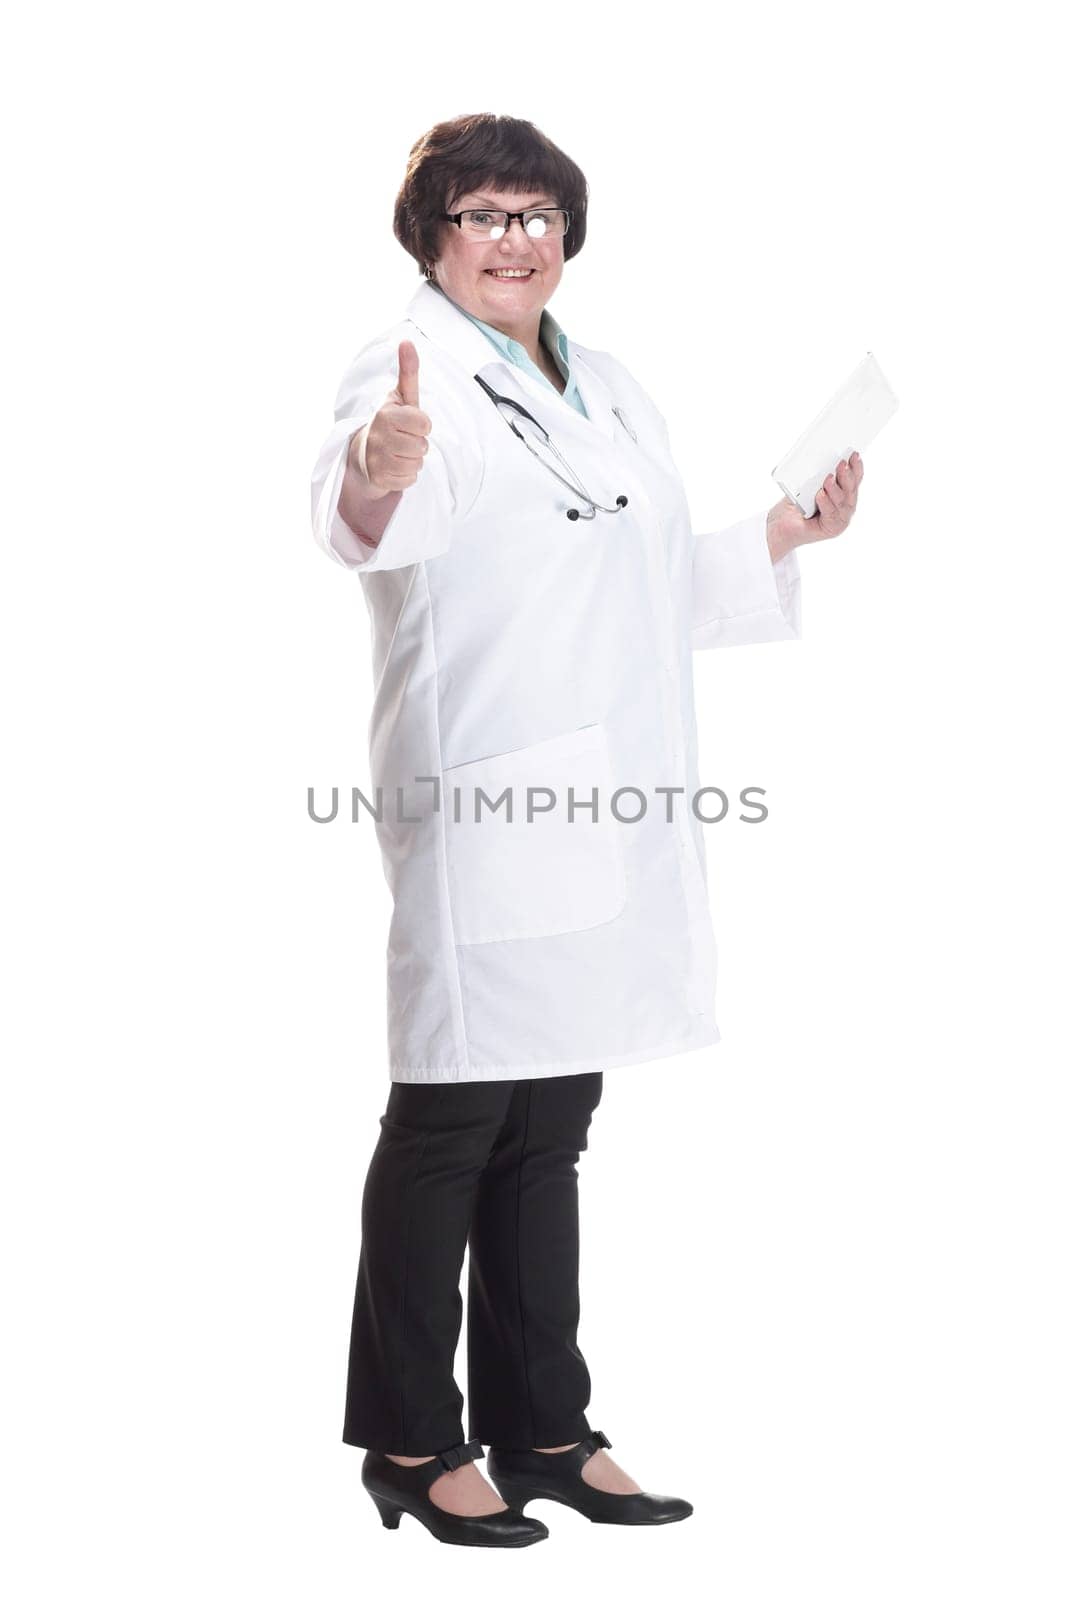 in full growth. senior female doctor with a digital tablet . isolated on a white background.